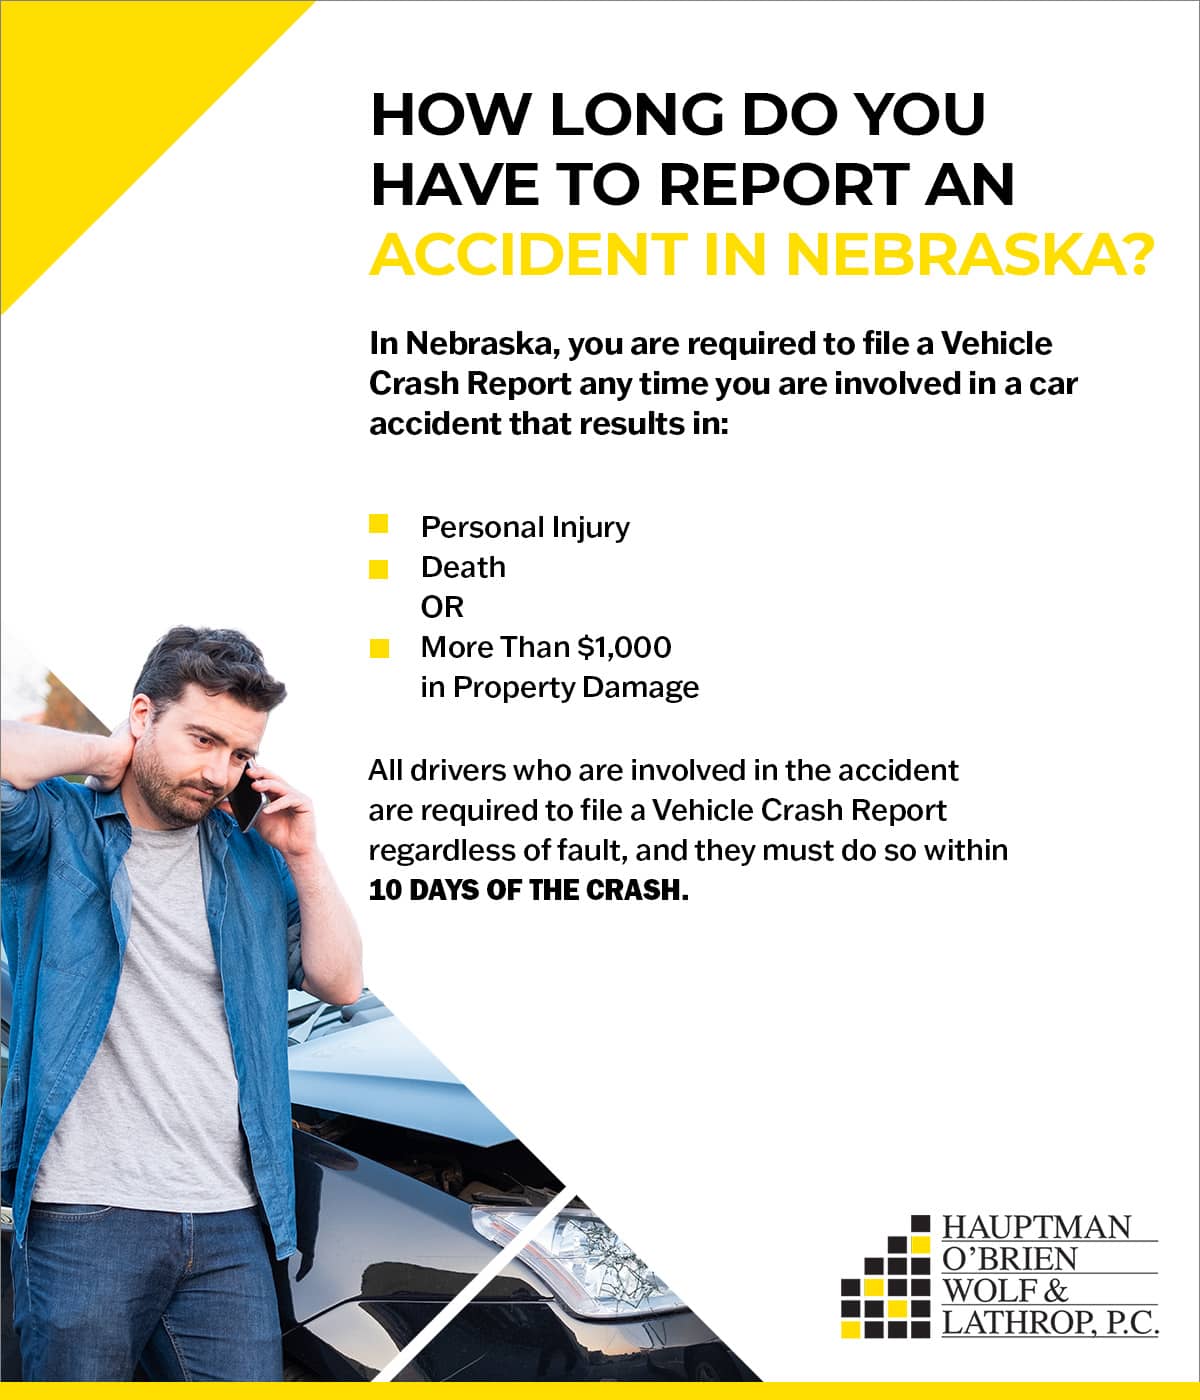 How long do you have to report an accident in Nebraska?